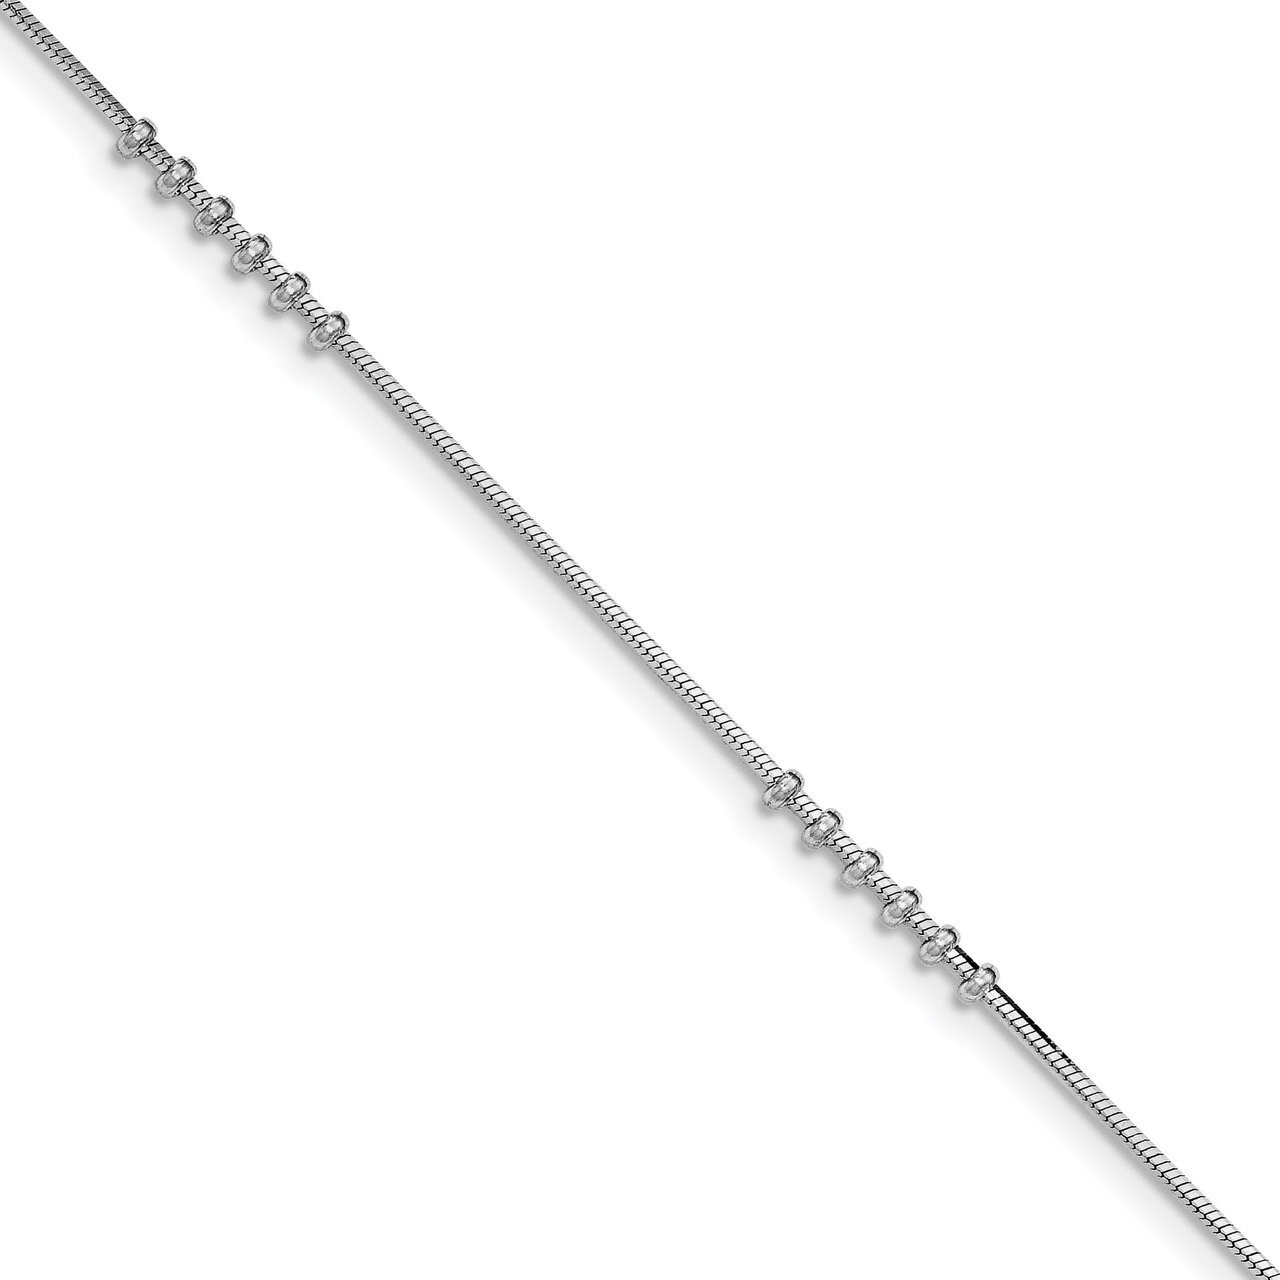 0.5 Inch extension Anklet Sterling Silver Rhodium-plated Polished QG3567-10